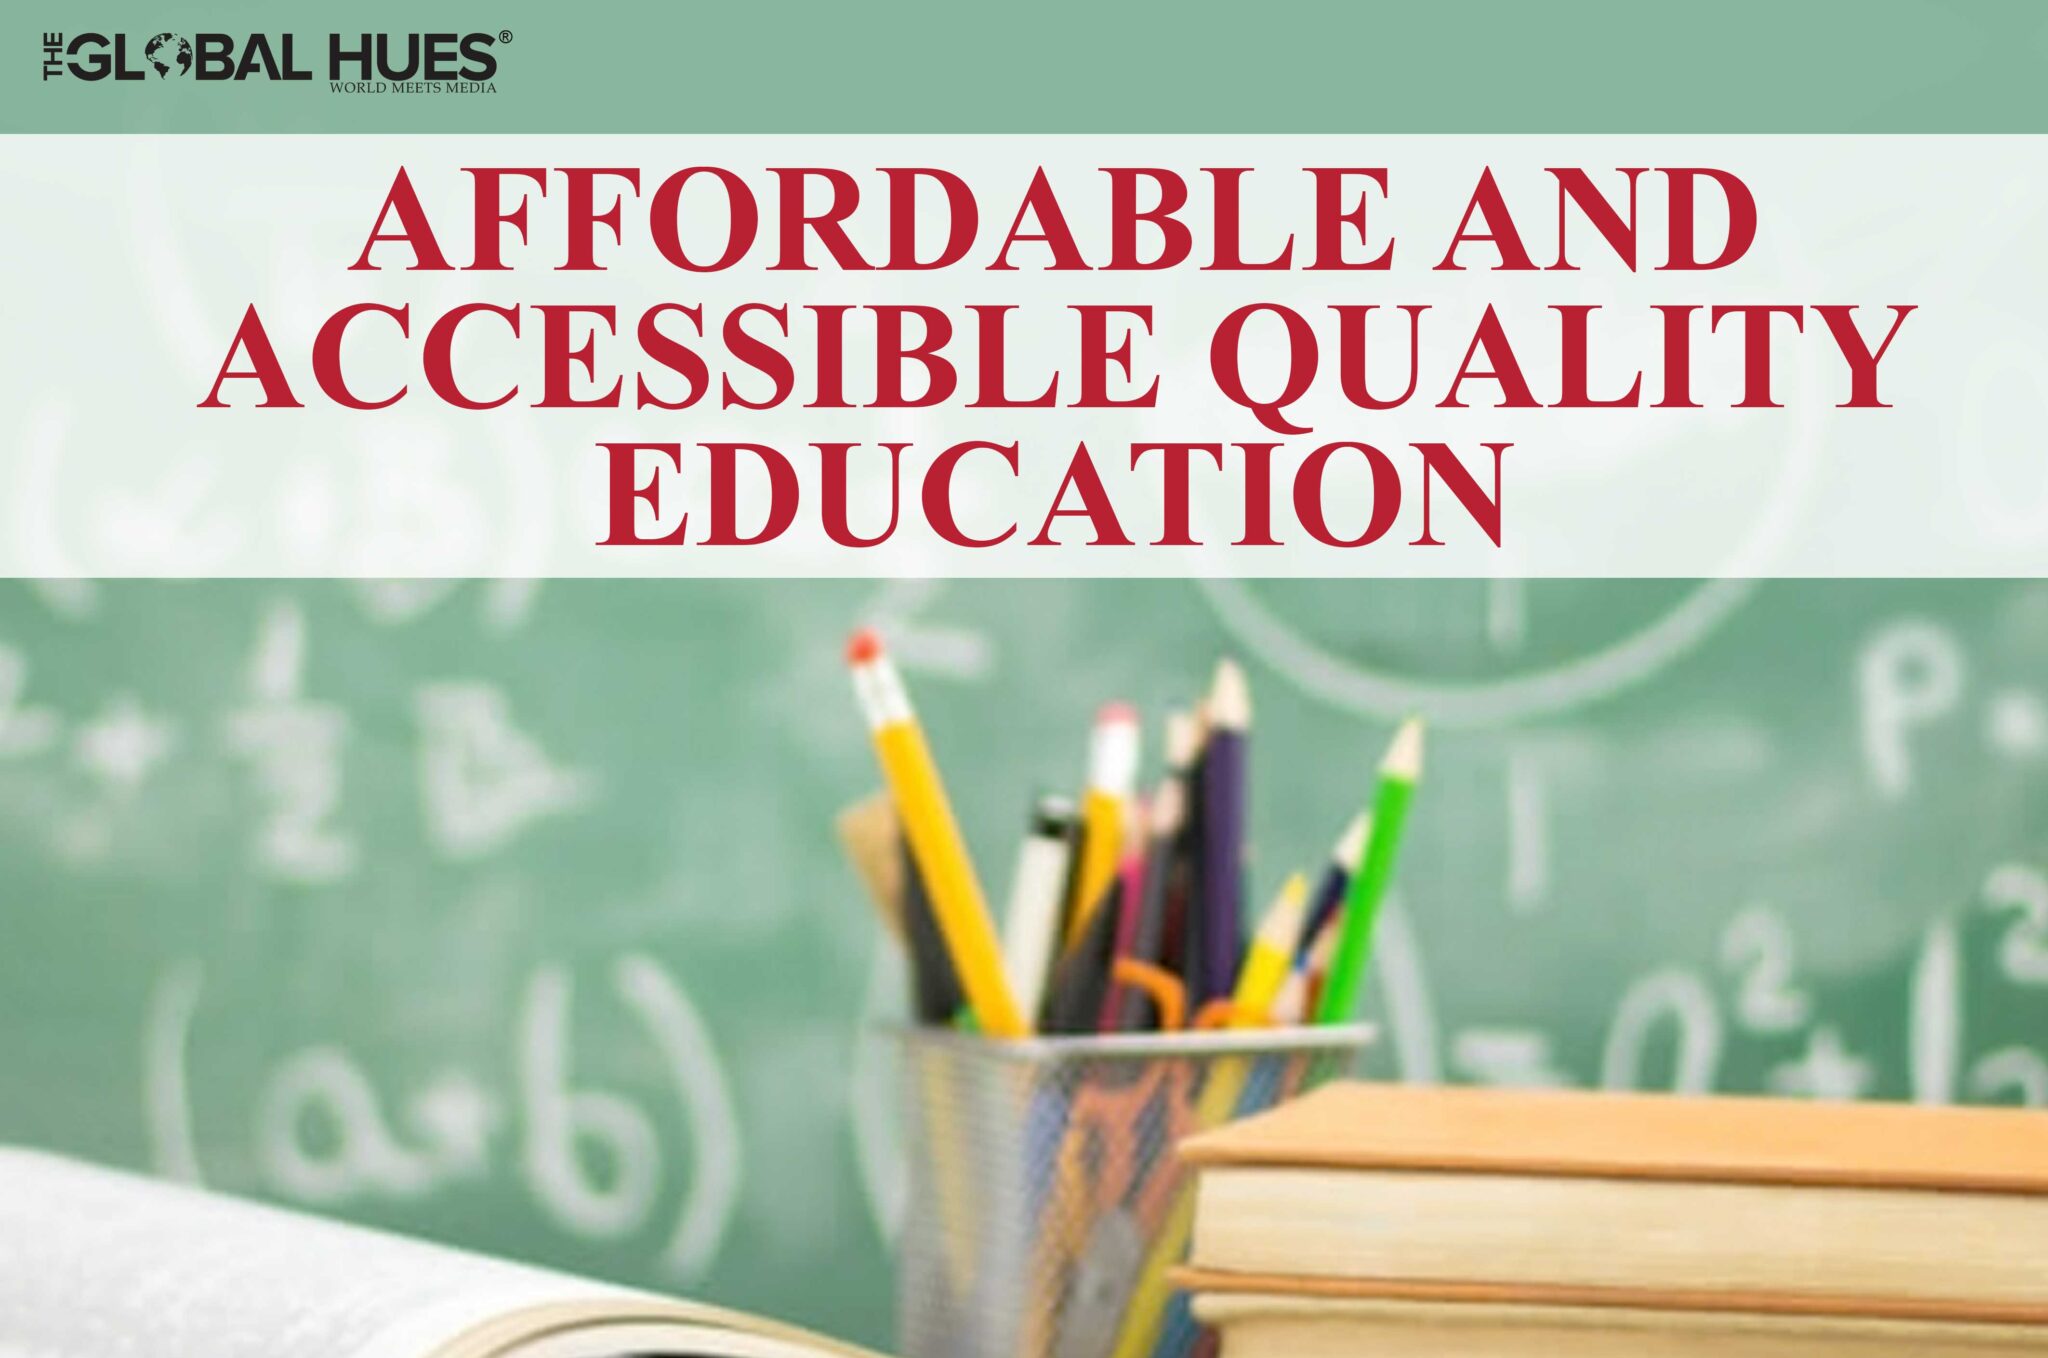 topic about quality education